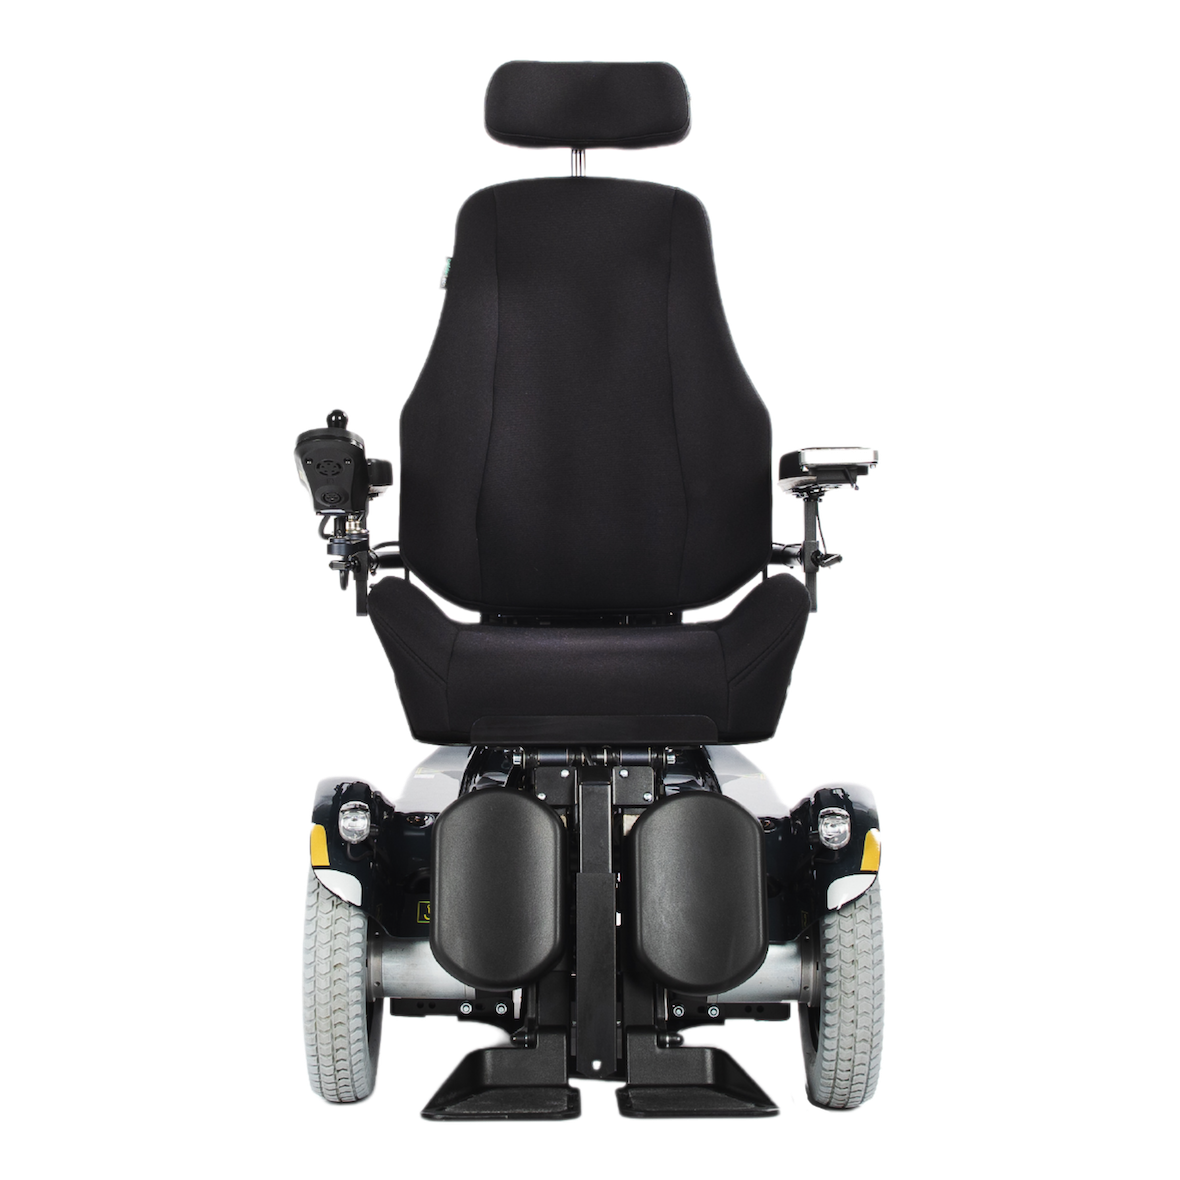 The front view of a a Balder Finesse F380 powerchair in a seated position.